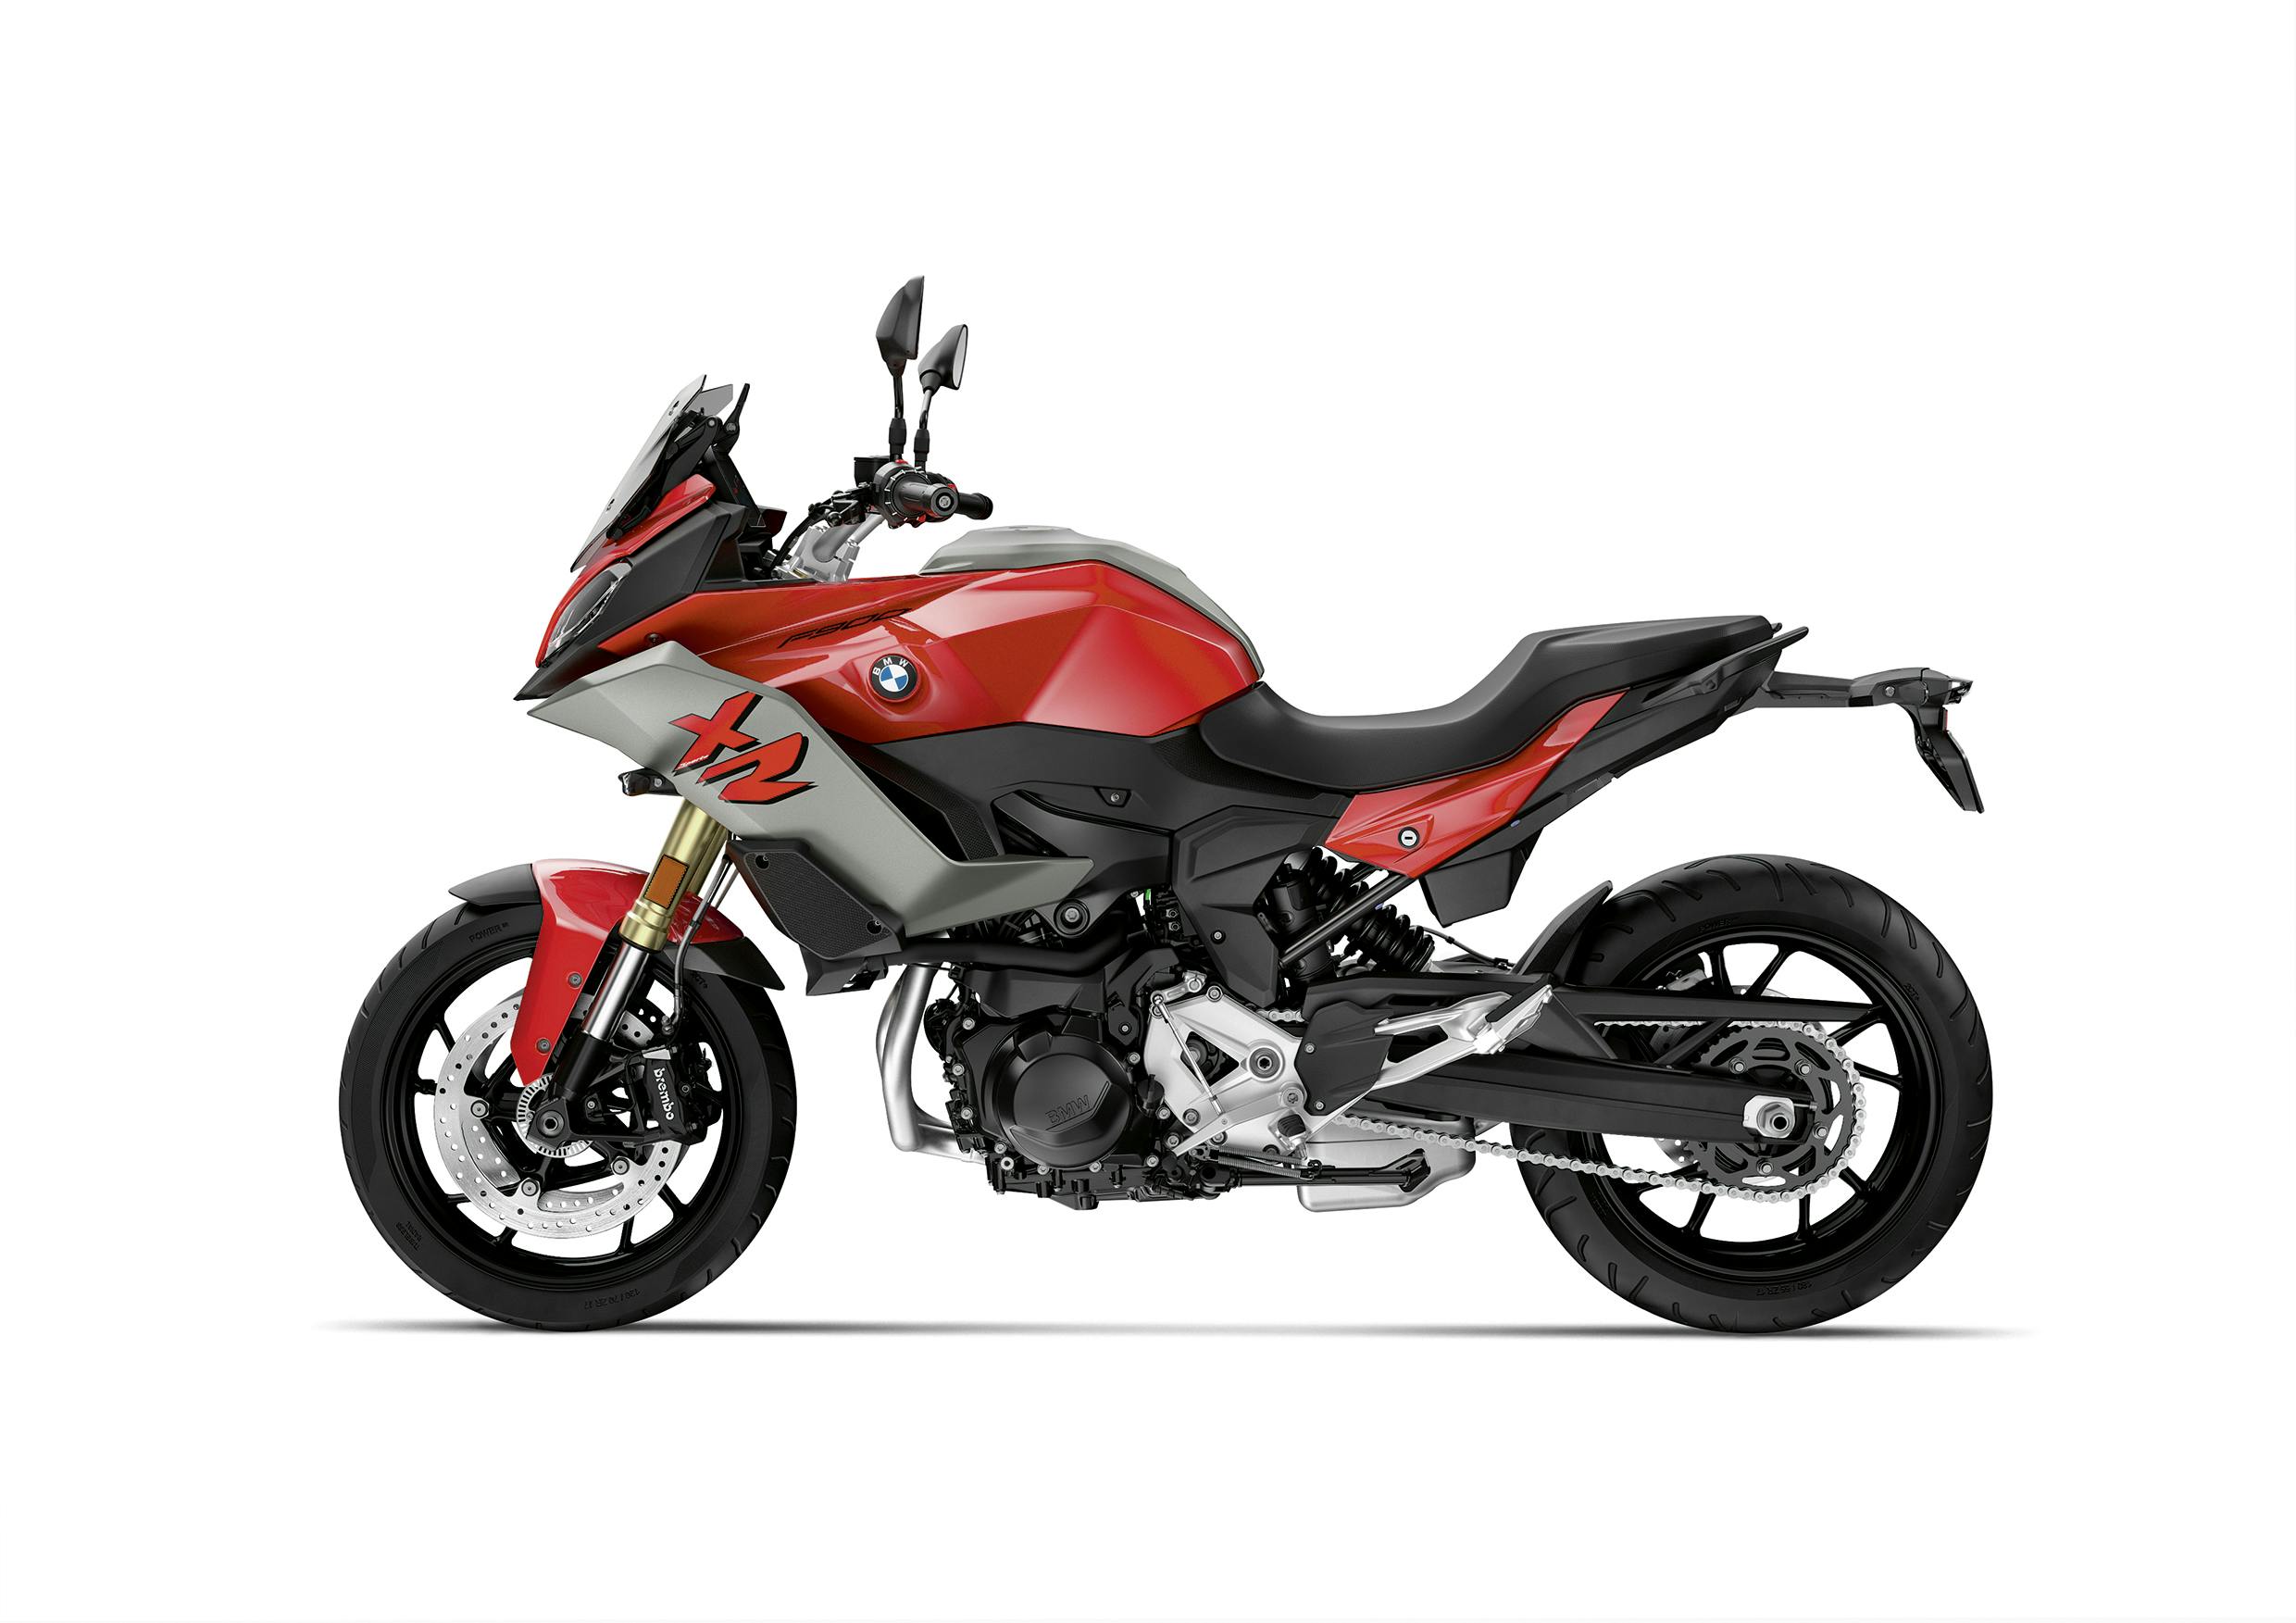 BMW F 900 XR in racing red colour